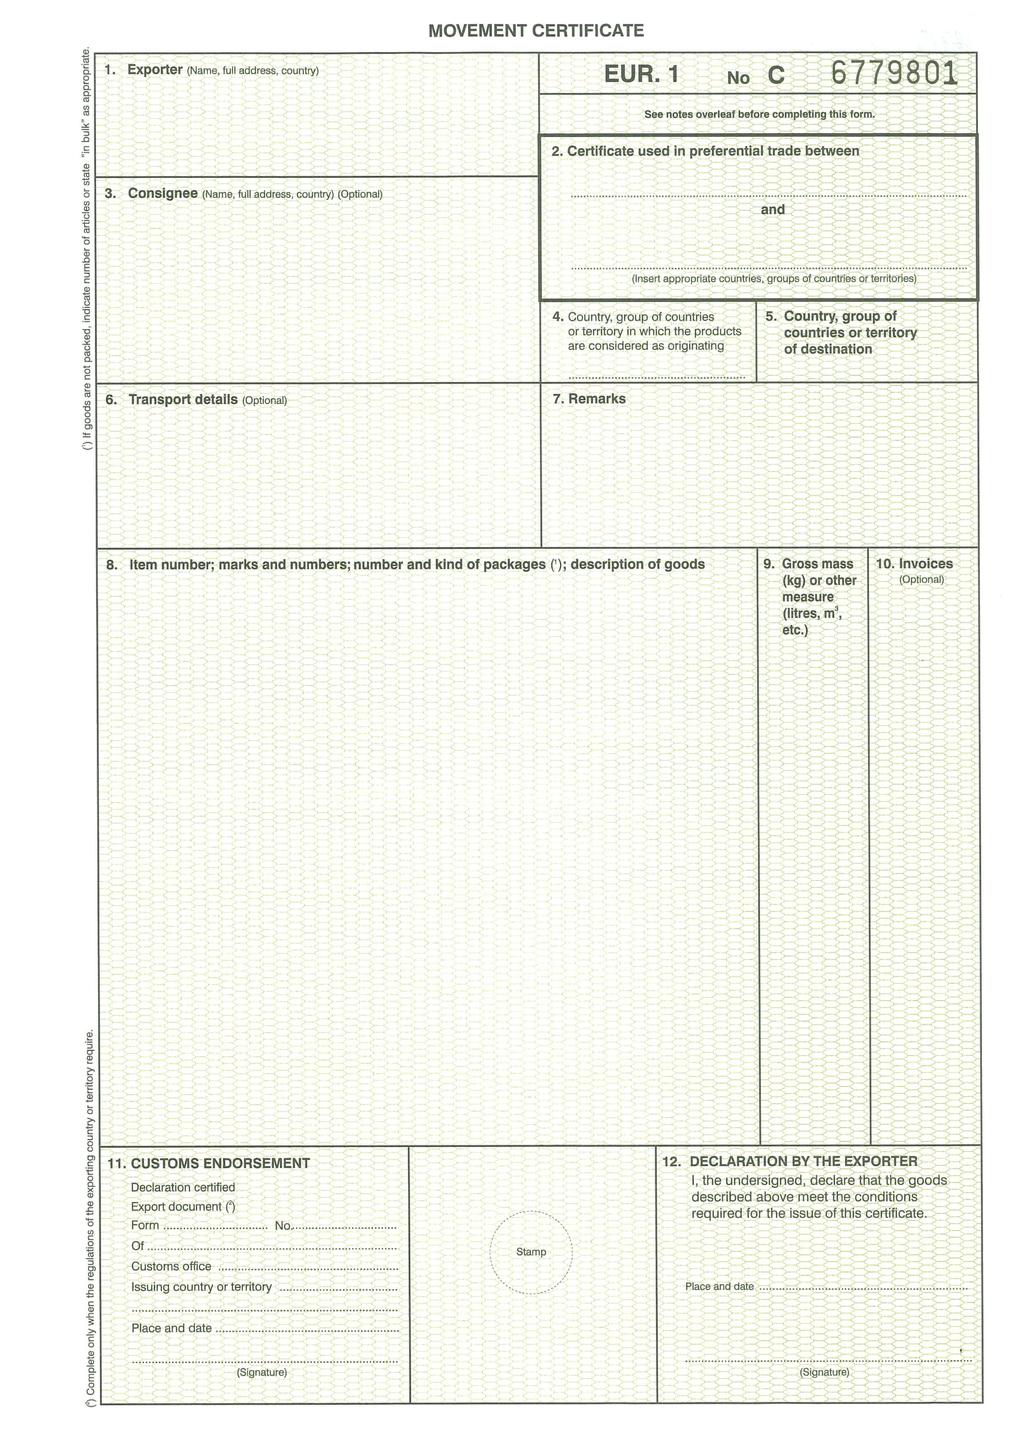 MOVEMENT CERTIFICATE EUR. 1 1. Exporter (Name, full address, country) No C 6779801 See notes overleaf before completing this form. 2. Certificate used in preferential trade between 3.